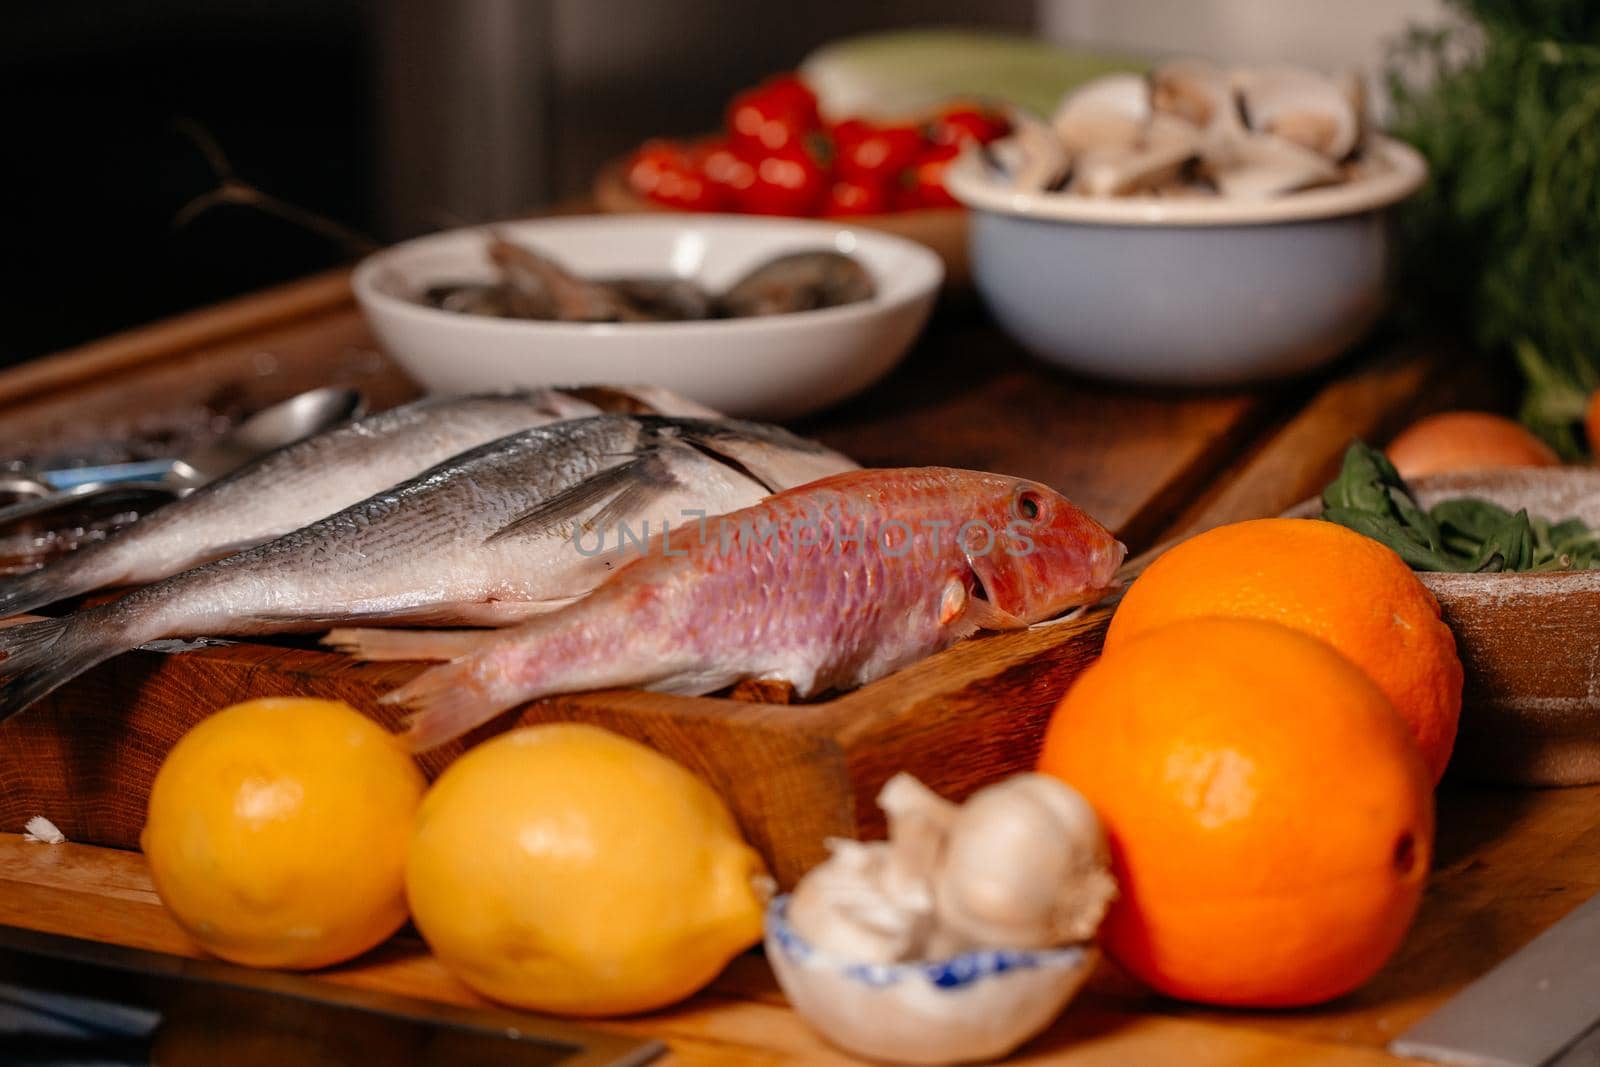 Sea bream and shells on the table next to vegetables and fruit. Ingredients for making a delicious soup. Fine cuisine.